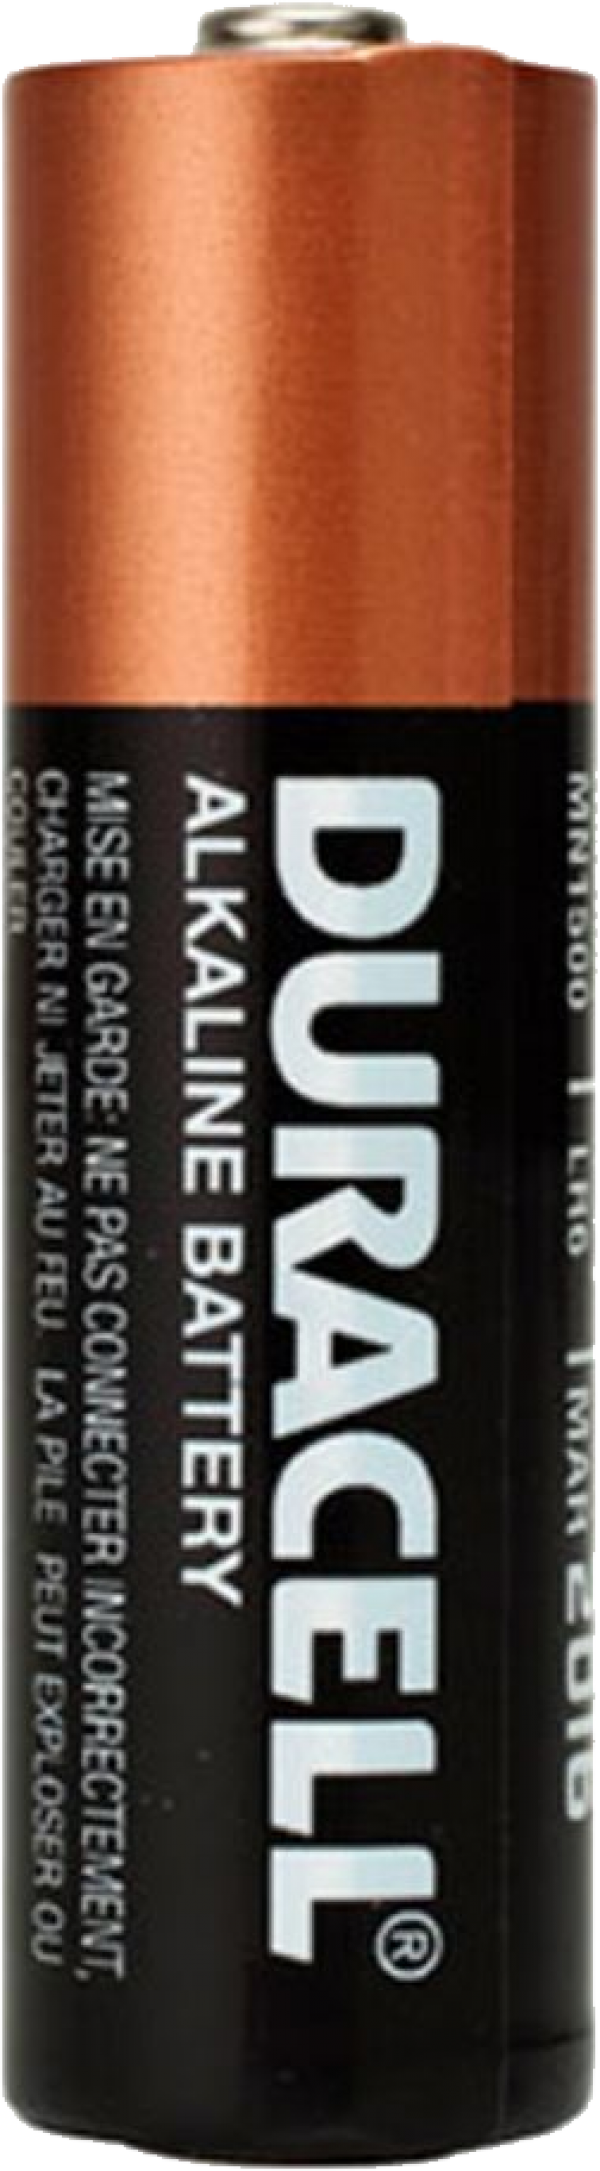 alkaline duracell battery free png download (2)